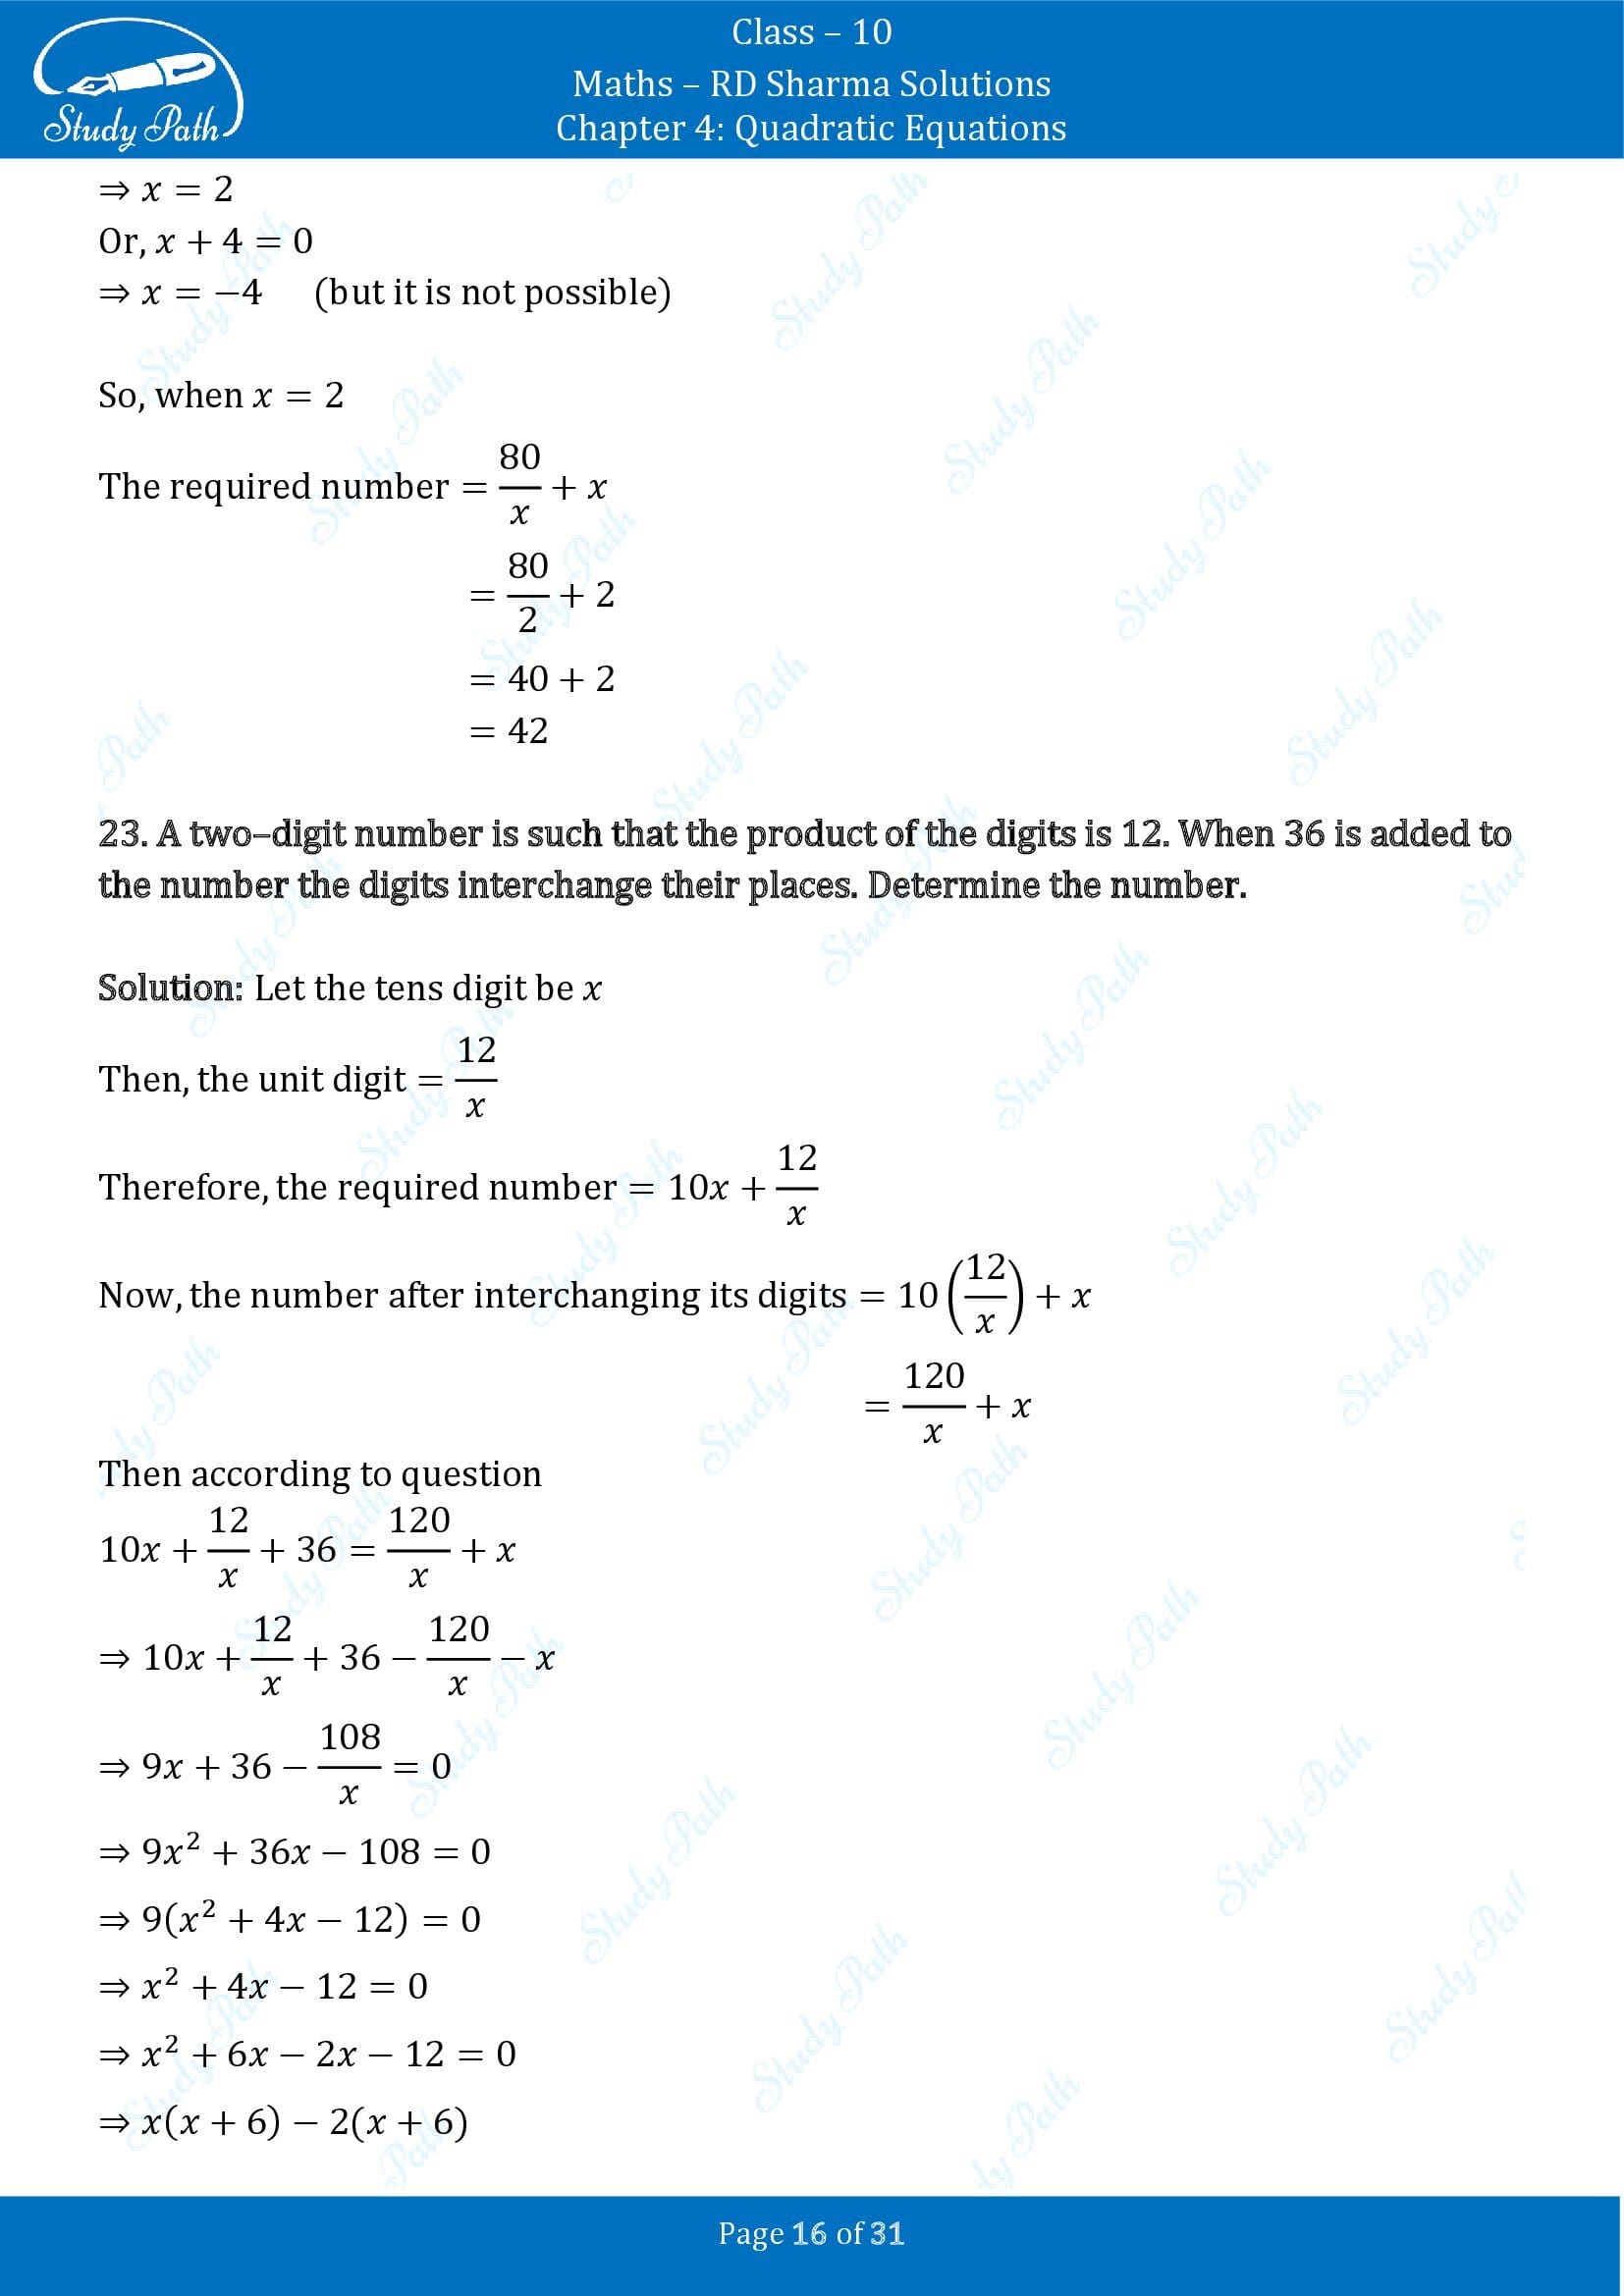 RD Sharma Solutions Class 10 Chapter 4 Quadratic Equations Exercise 4.7 00016